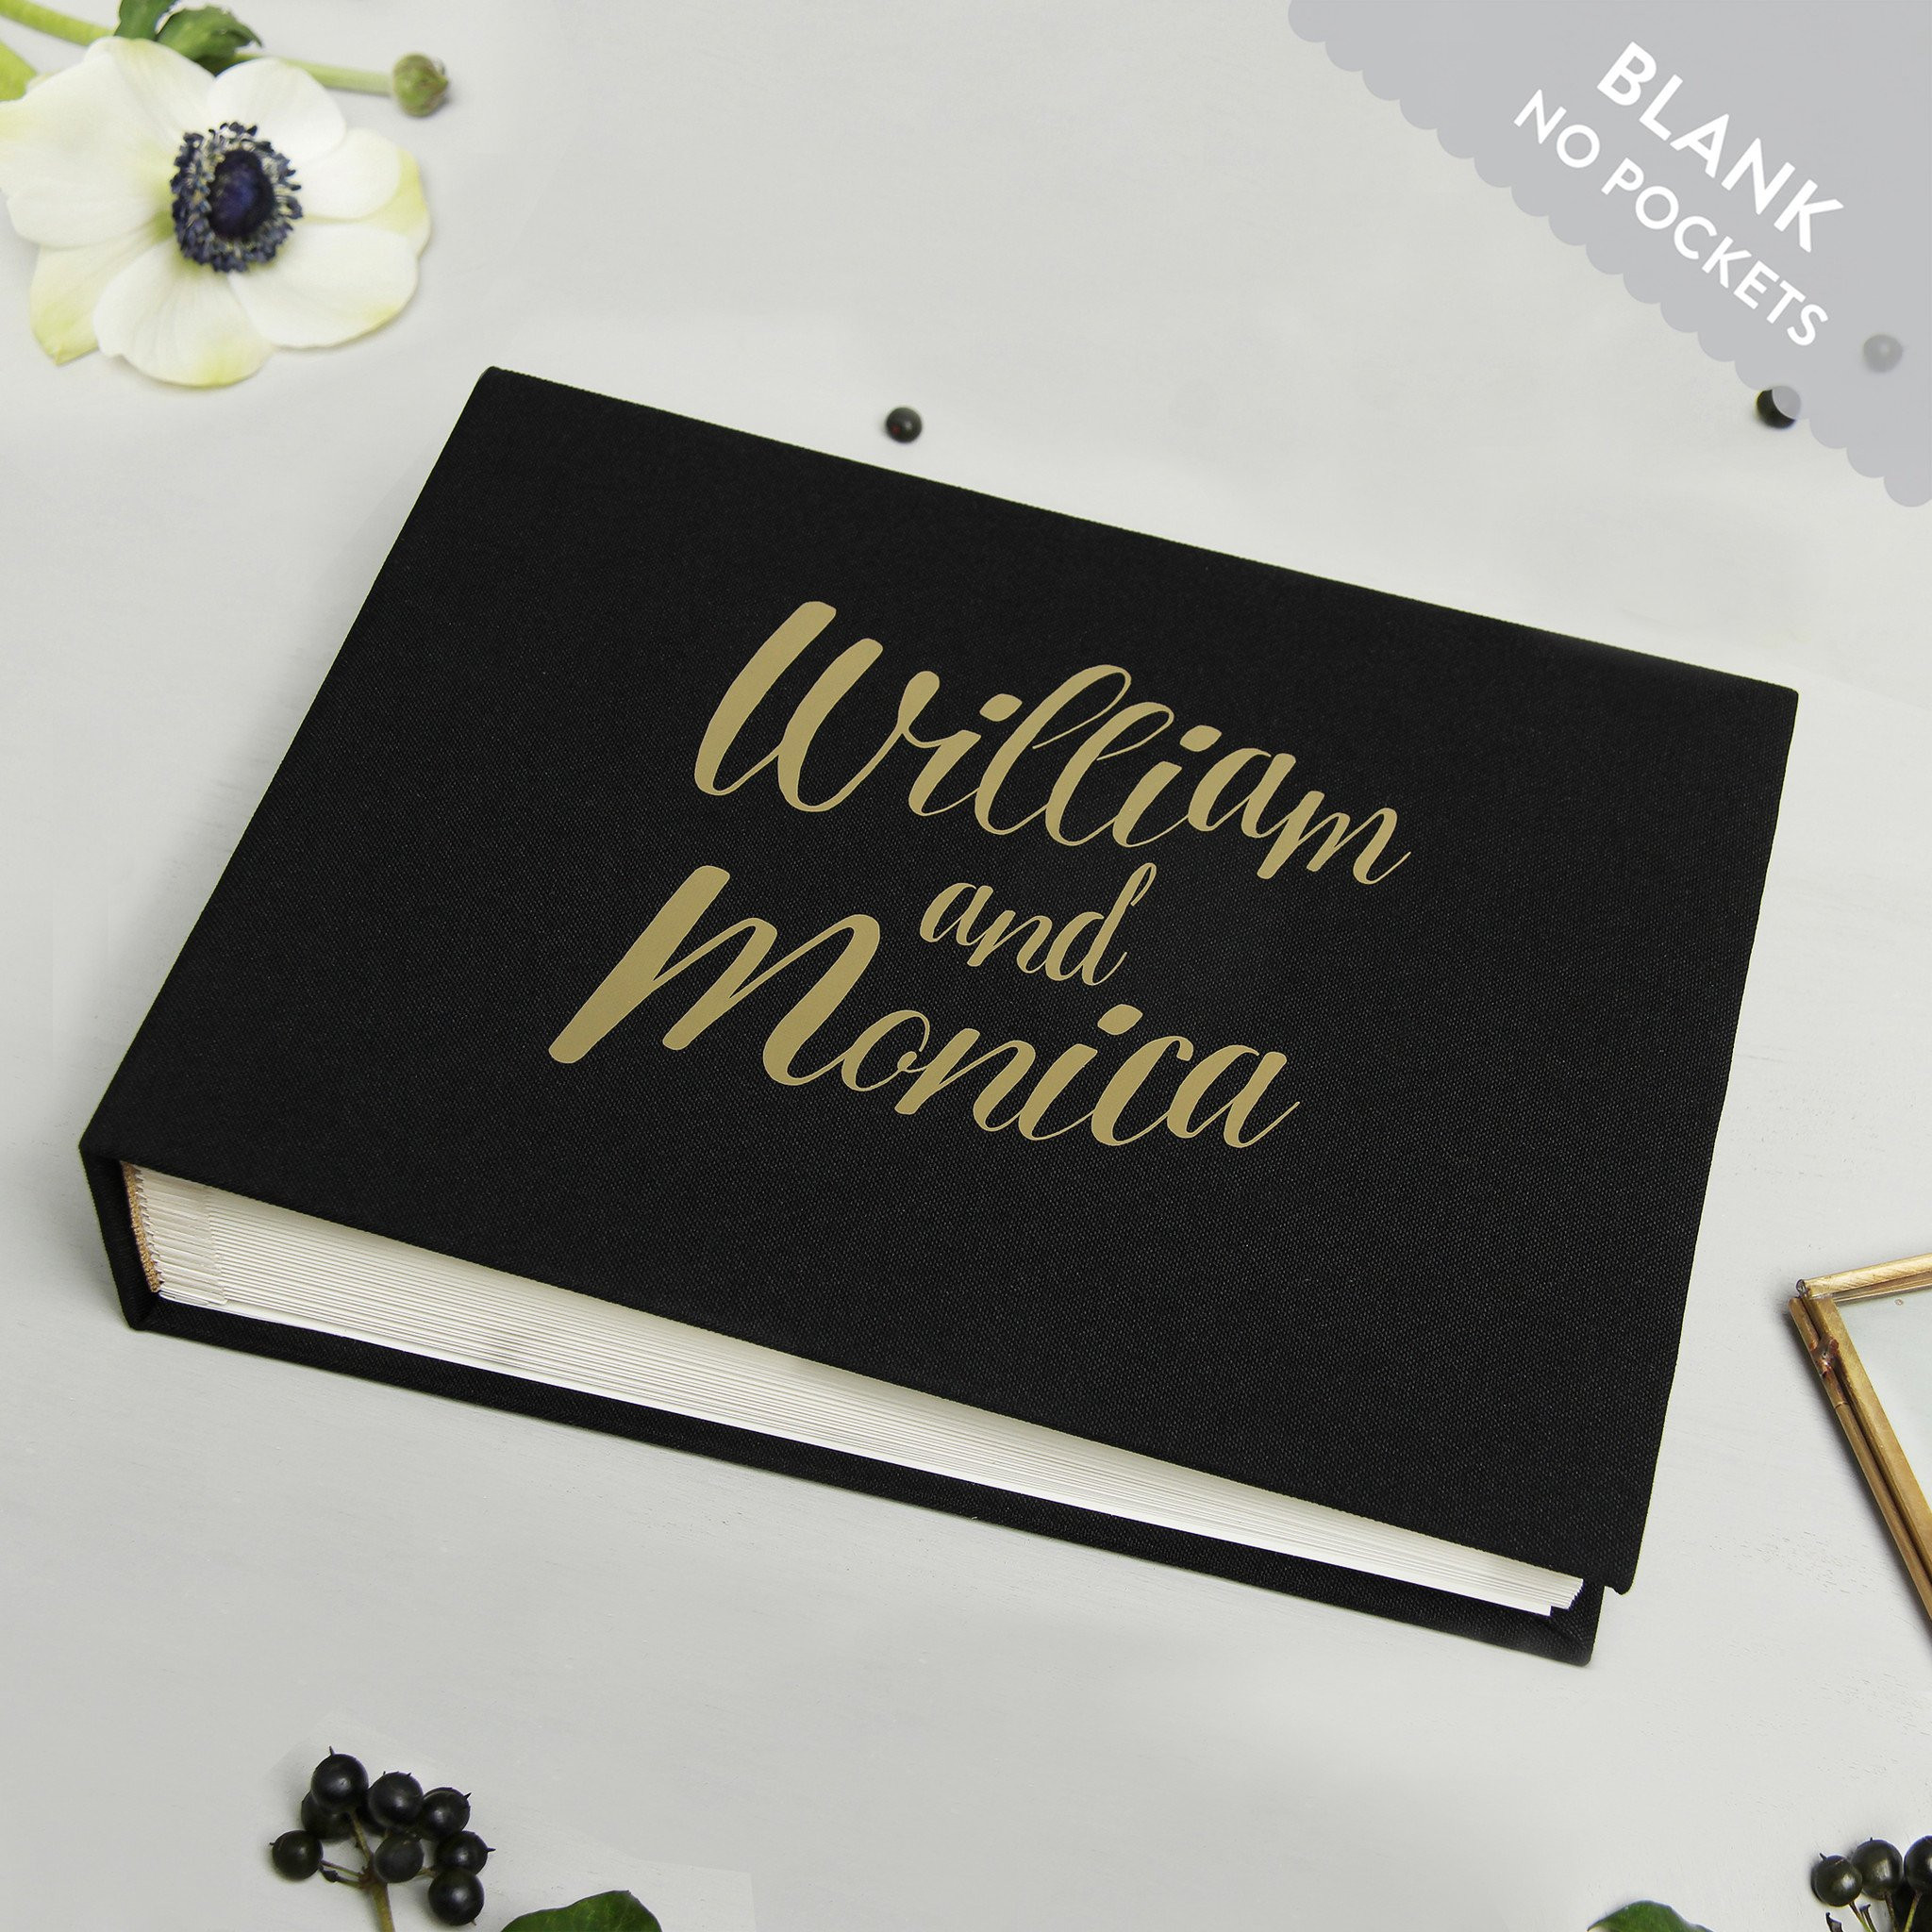 Wedding Guest Book Black
 Wedding Guest Book Album Black with Gold Lettering Empty